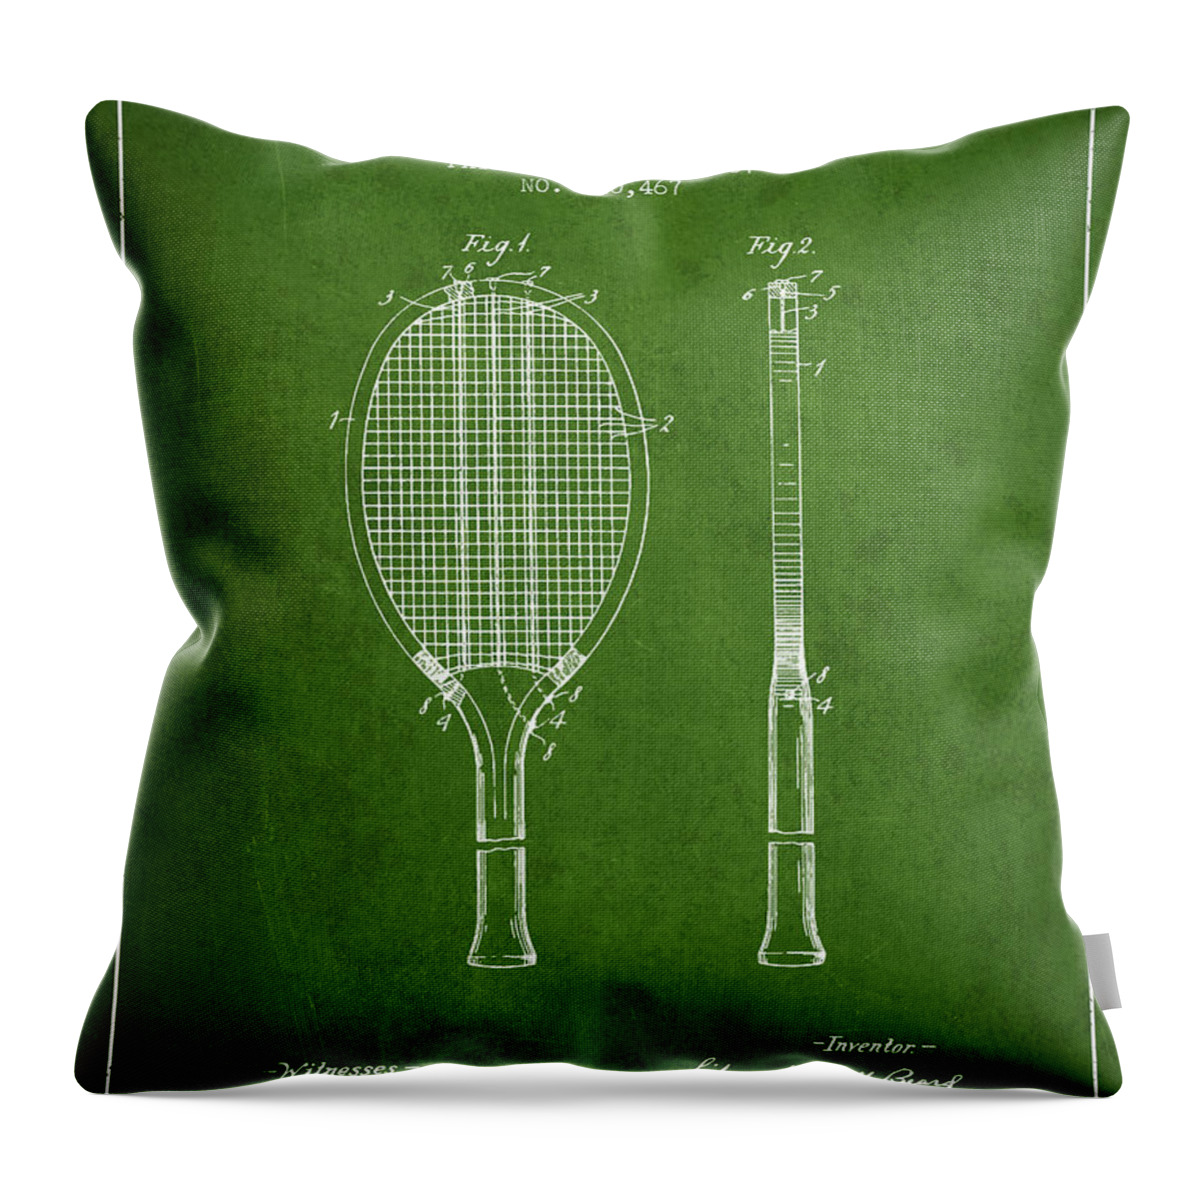 Tennis Racket Throw Pillow featuring the digital art Tennis Racket Patent from 1907 - Green by Aged Pixel